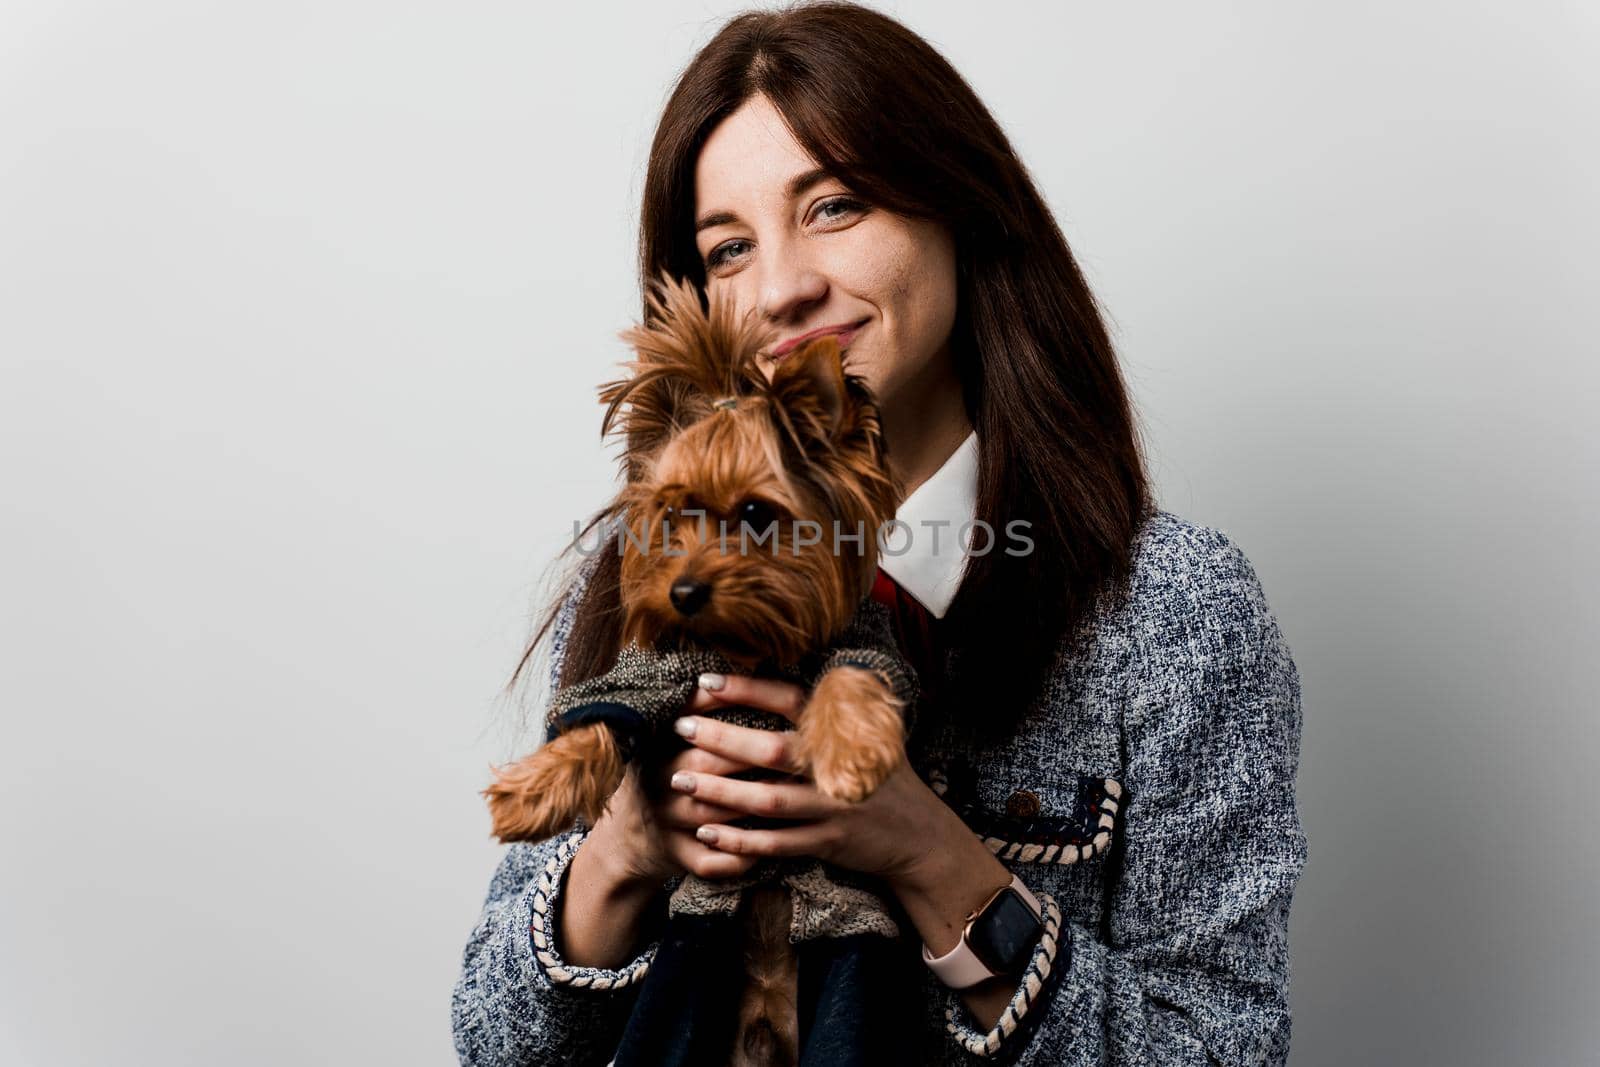 Young attractive woman with dog yorkshire terrier smiles. Close up photo. Pet care. People and pets. Girl holds brown dog isolated on white background